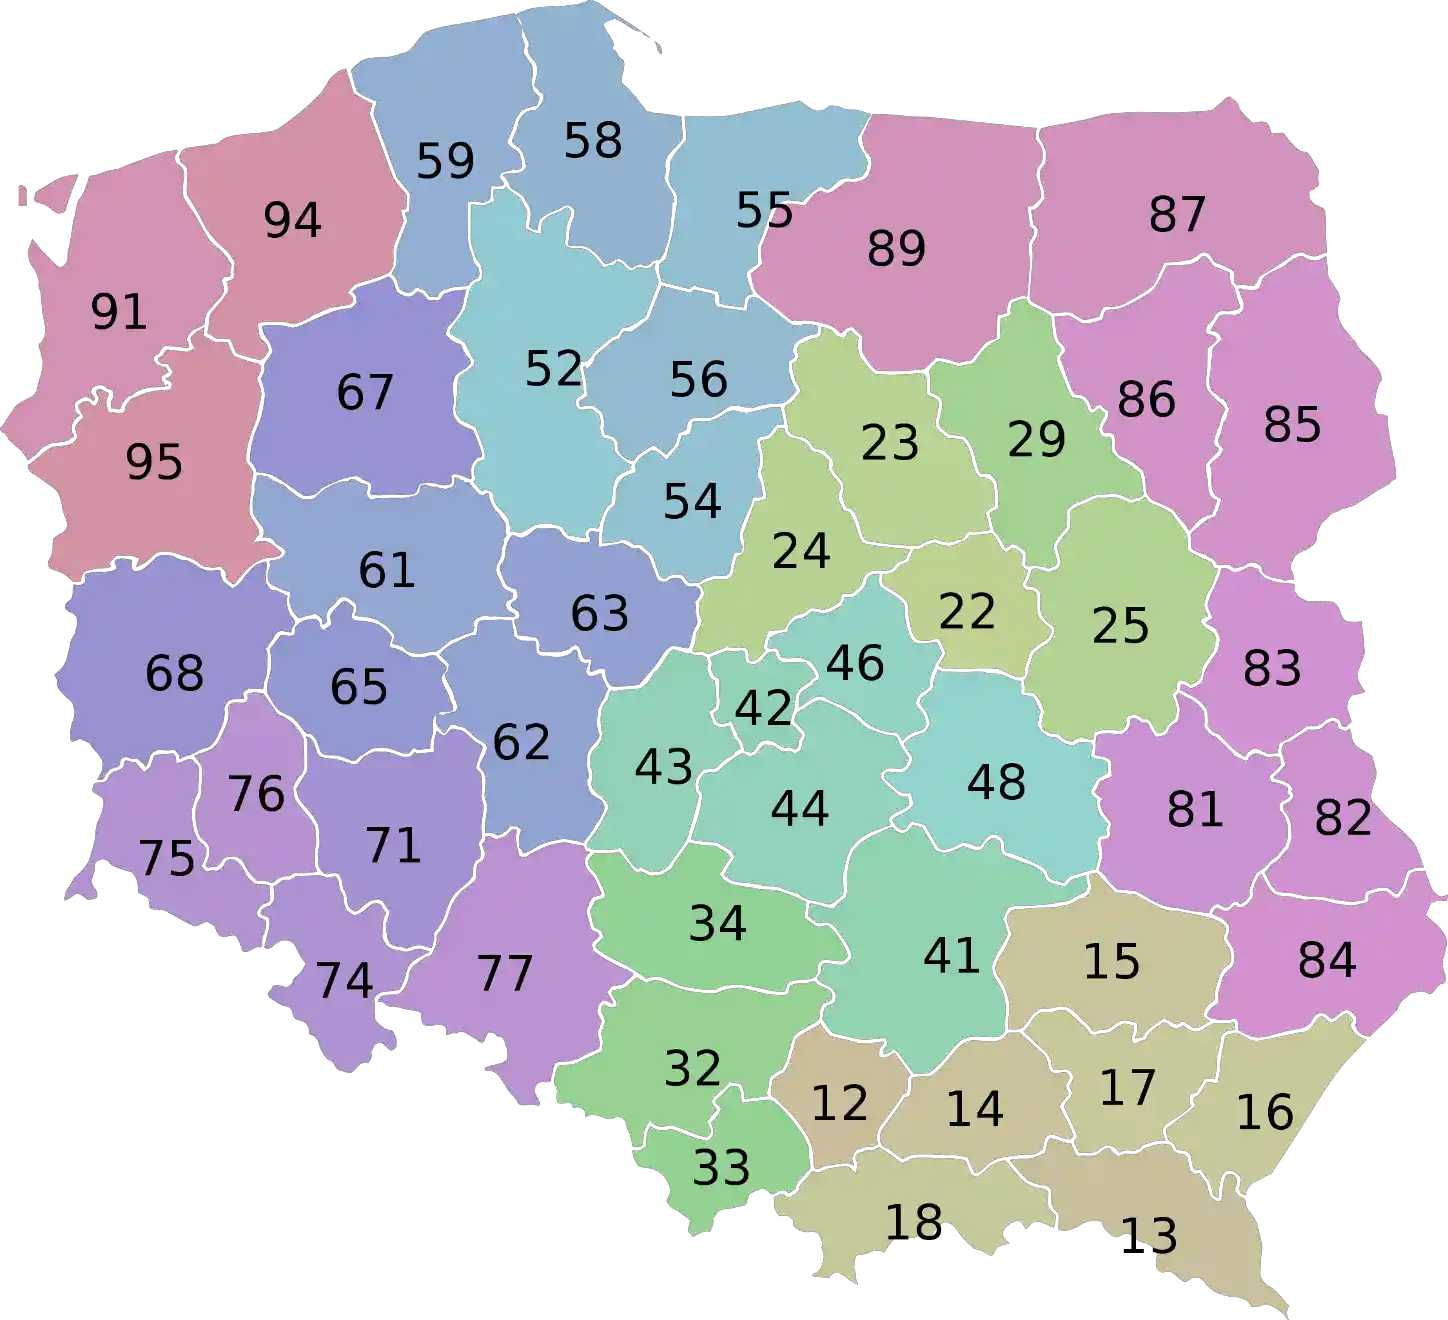 Poland-area-codes.png